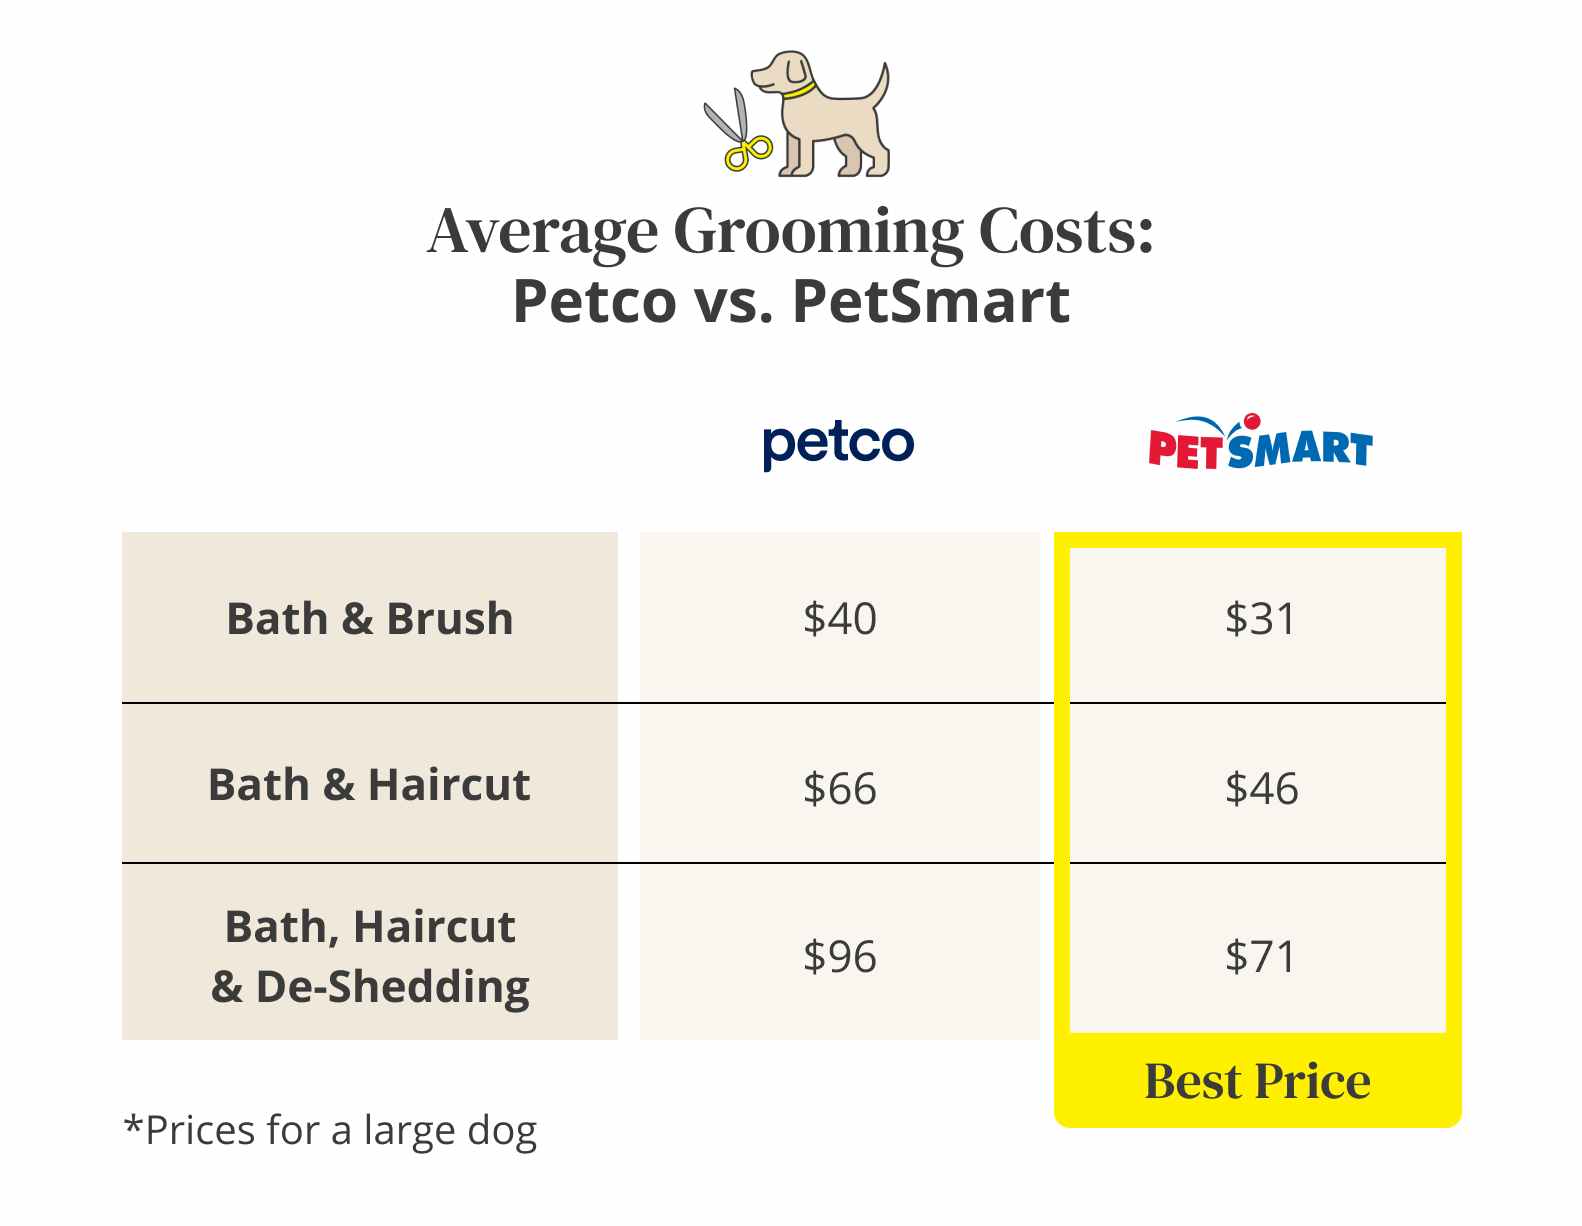 Price comparison for Petco vs. Petsmart grooming prices showing that PetSmart is cheaper.